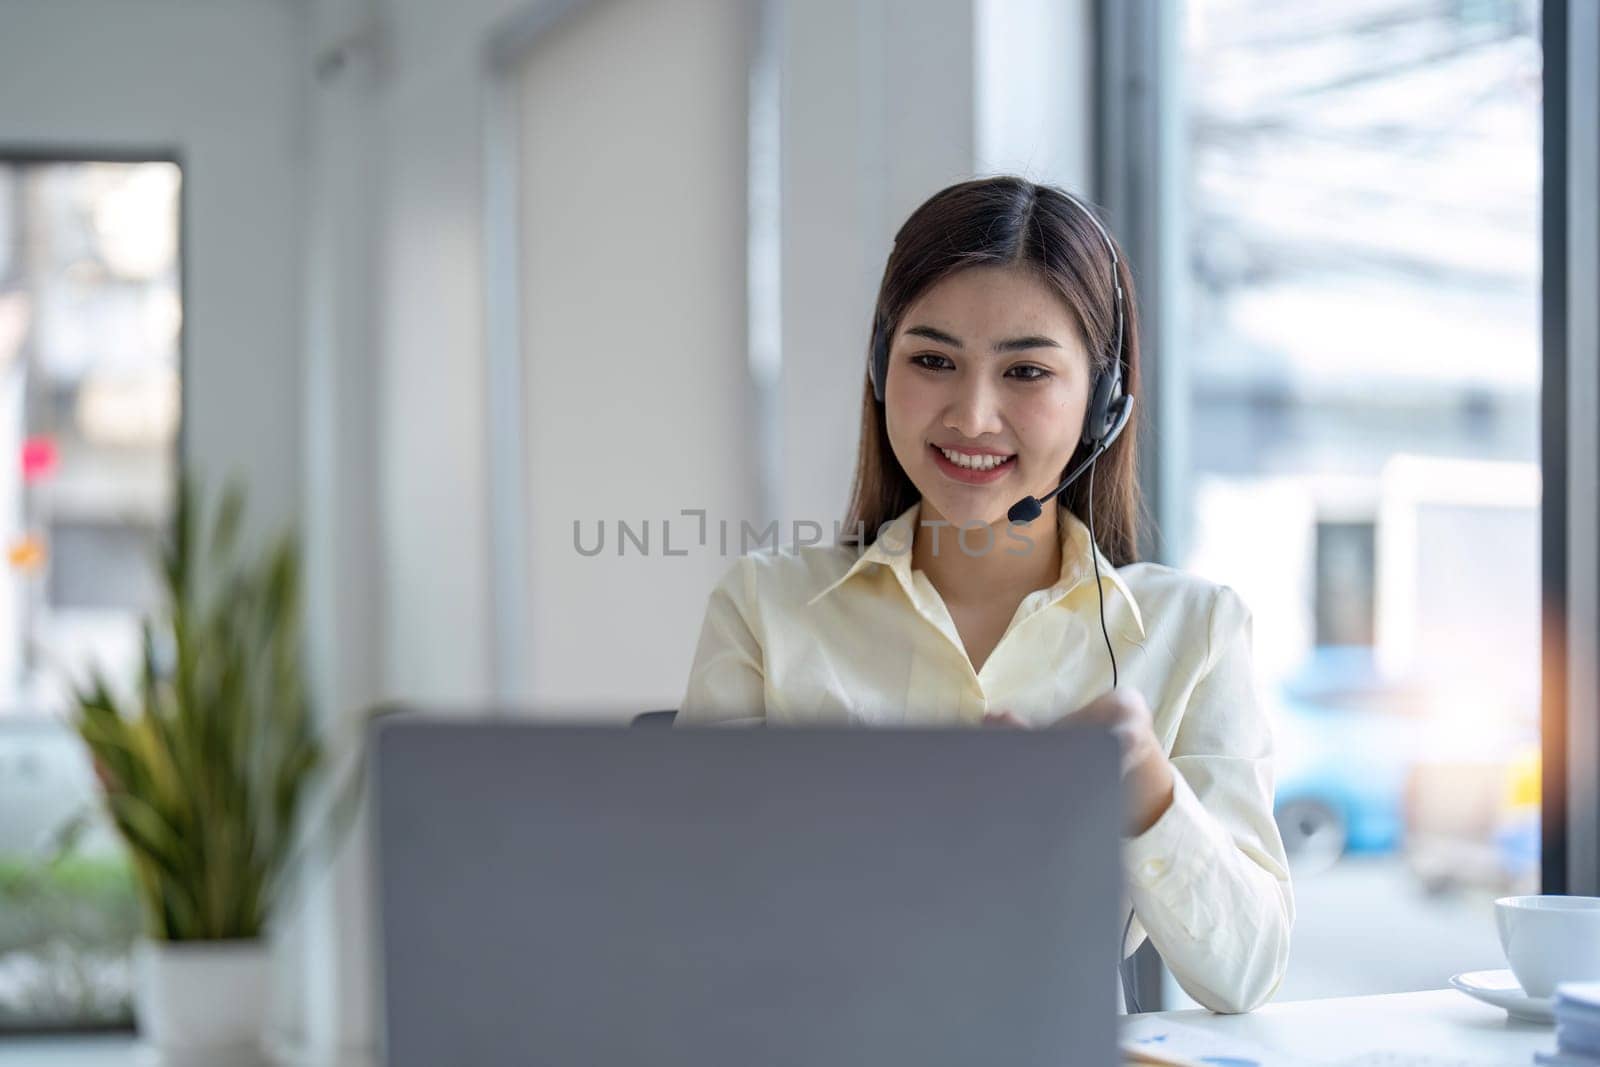 Portrait of happy smiling female customer support phone operator at workplace. Smiling beautiful Asian woman working in call center.